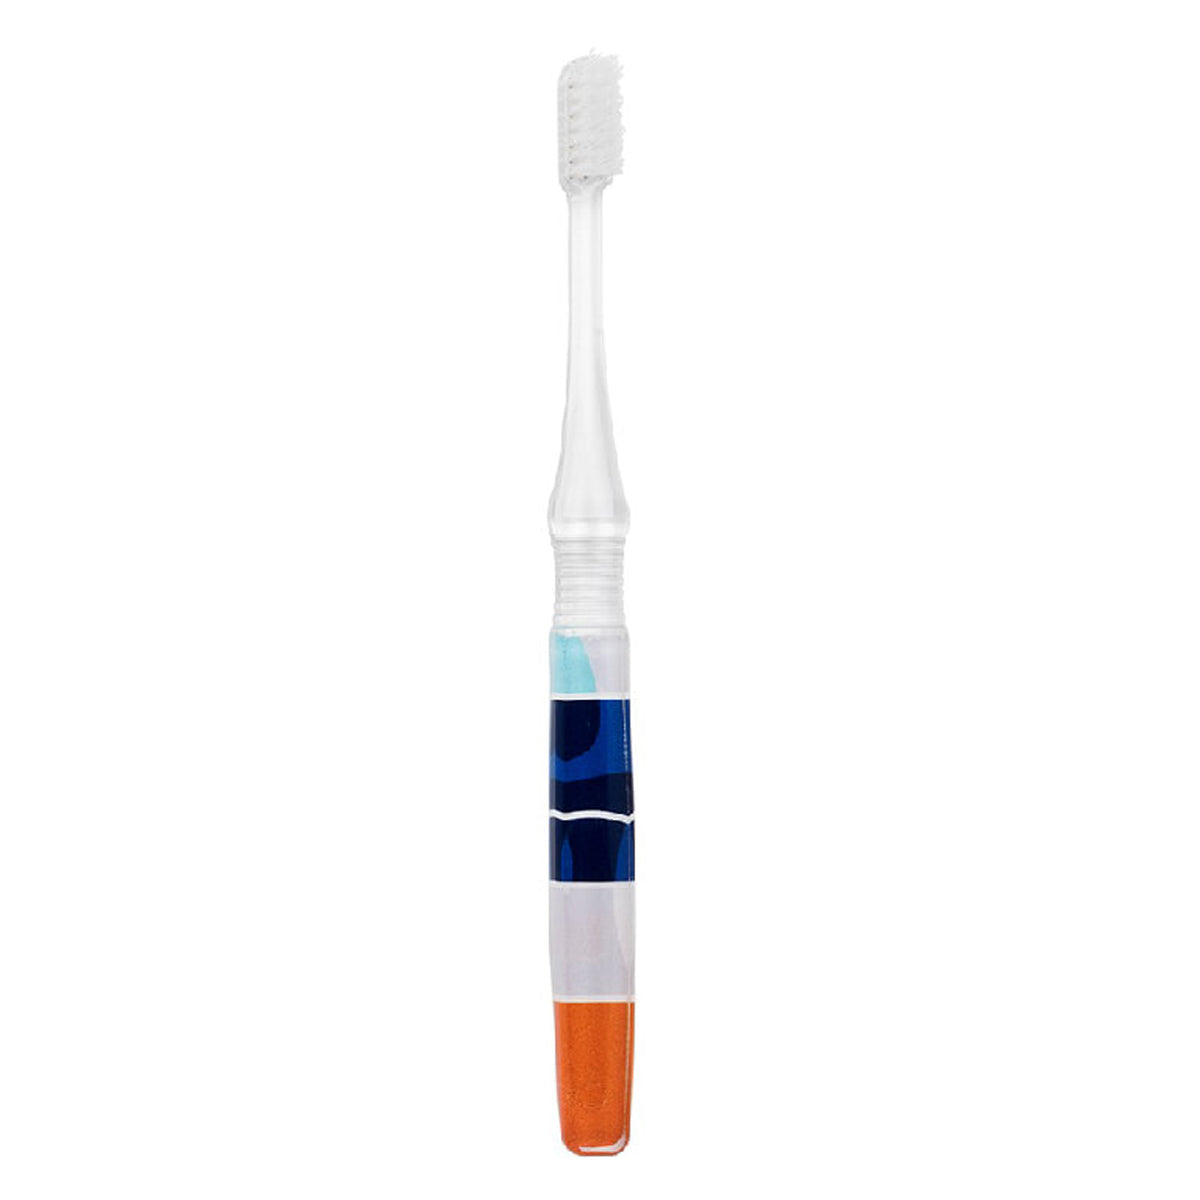 Primary image of DF 9 Toothbrush